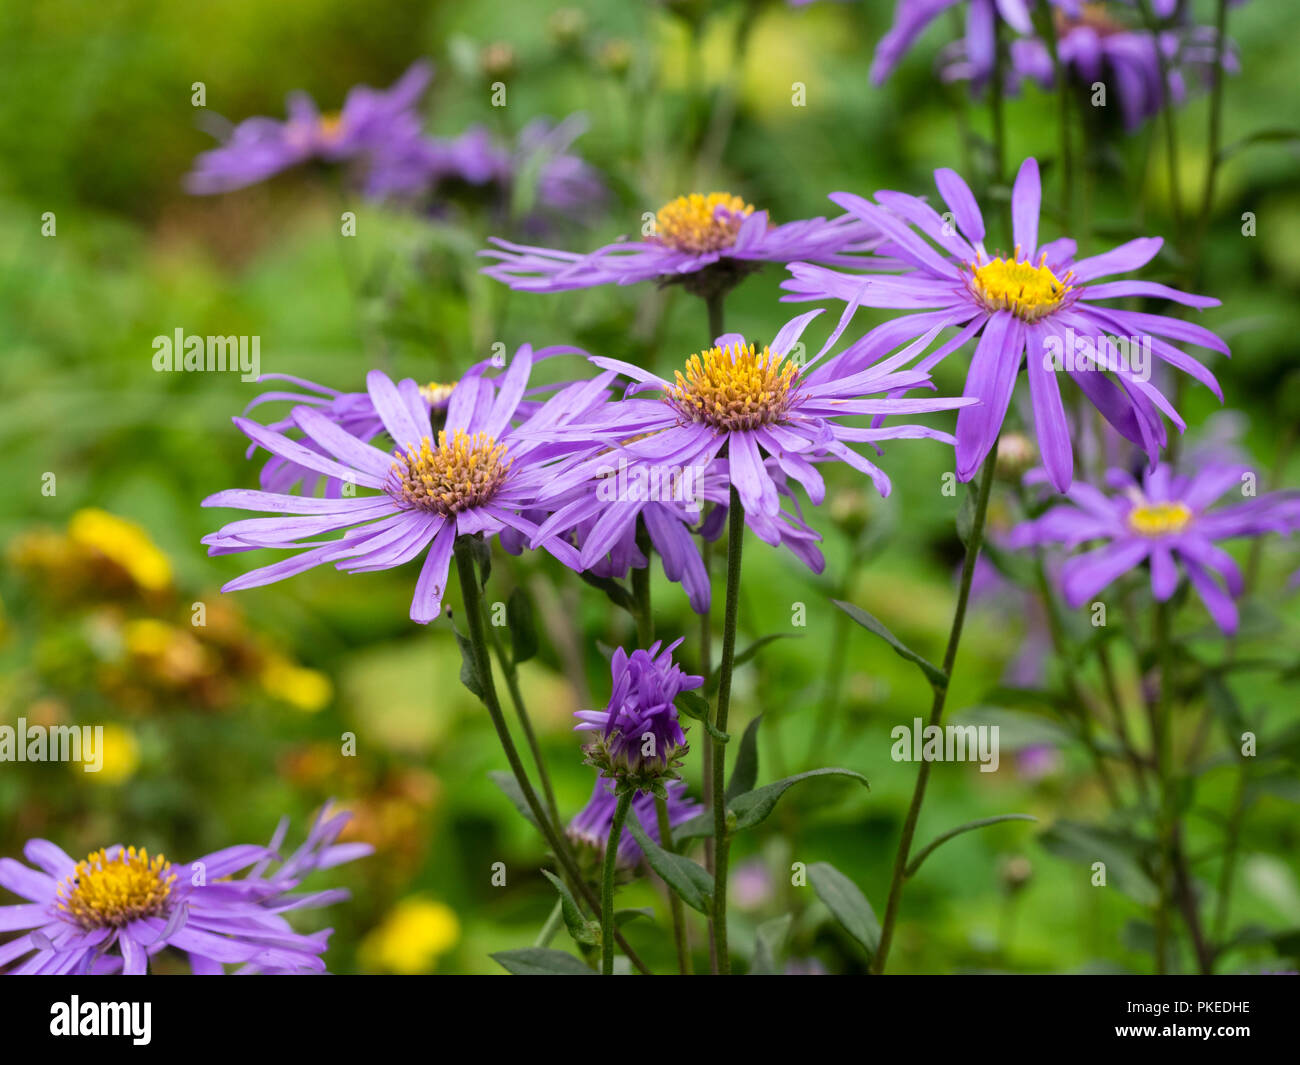 Late summer violet blue flowers of the hardy, daisy like perennial, Aster x frikartii 'Jungfrau' Stock Photo